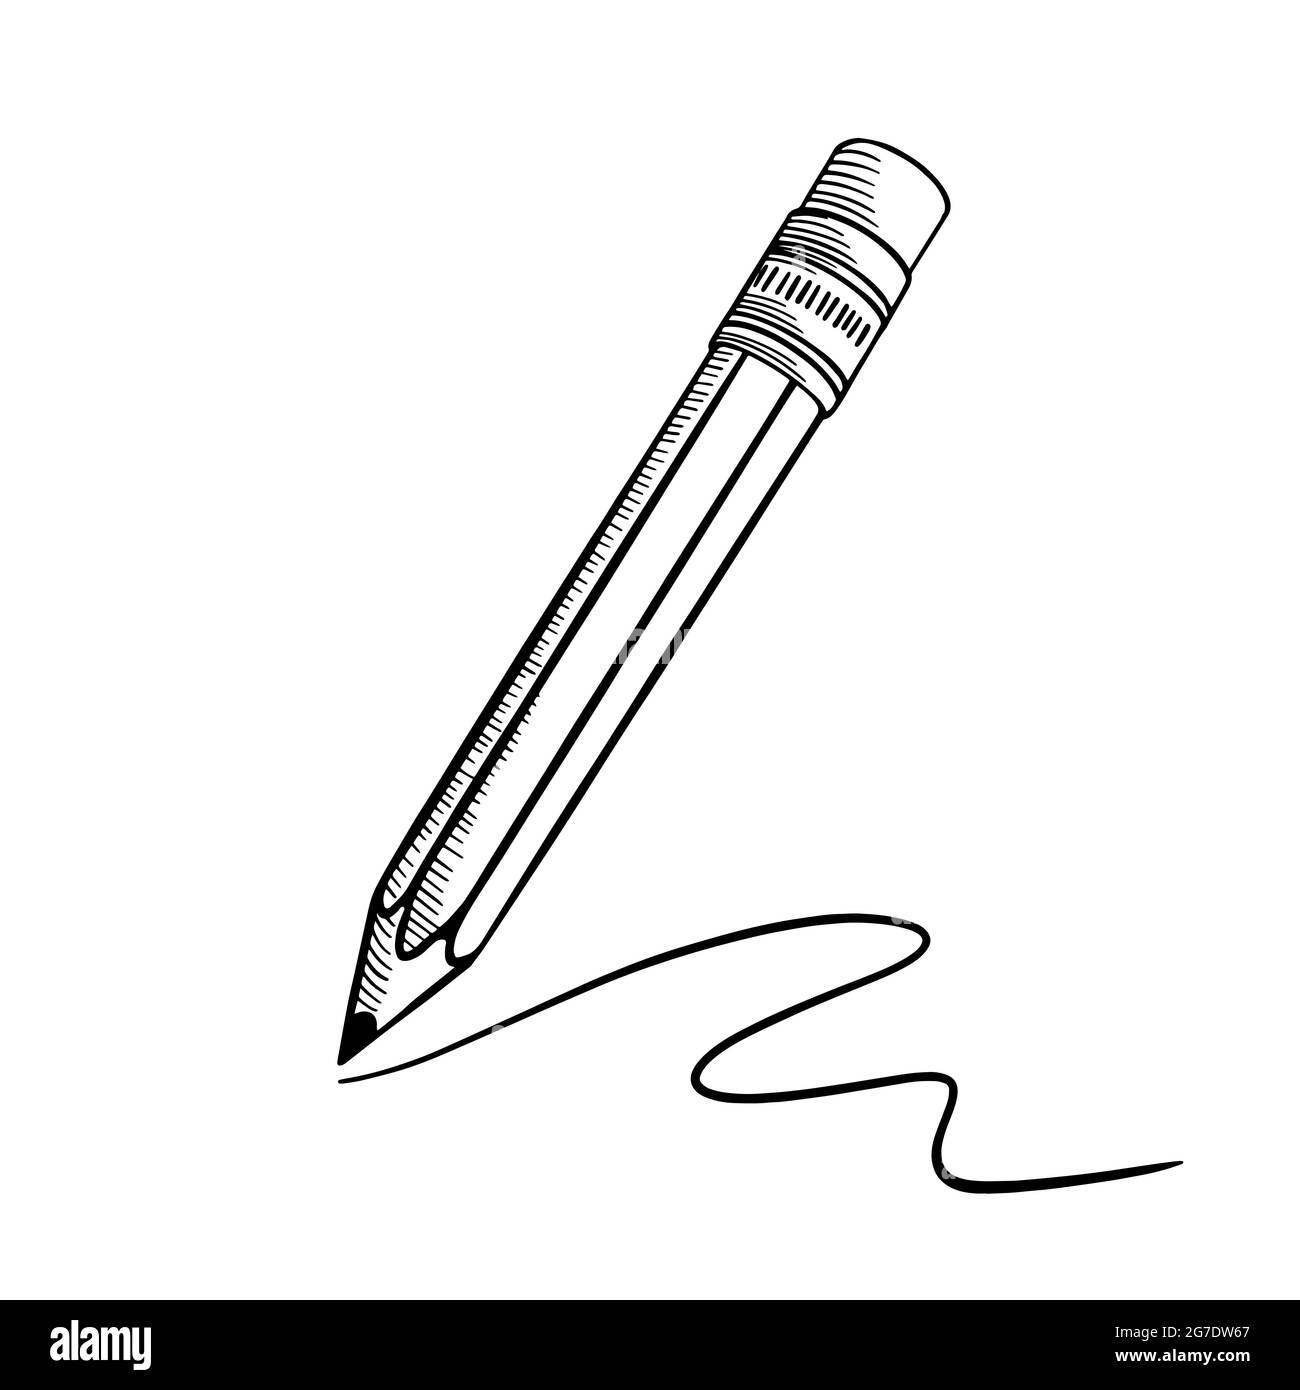 https://c8.alamy.com/comp/2G7DW67/hand-drawn-pencil-sketch-with-stroke-black-doodle-on-white-background-vector-illustration-2G7DW67.jpg